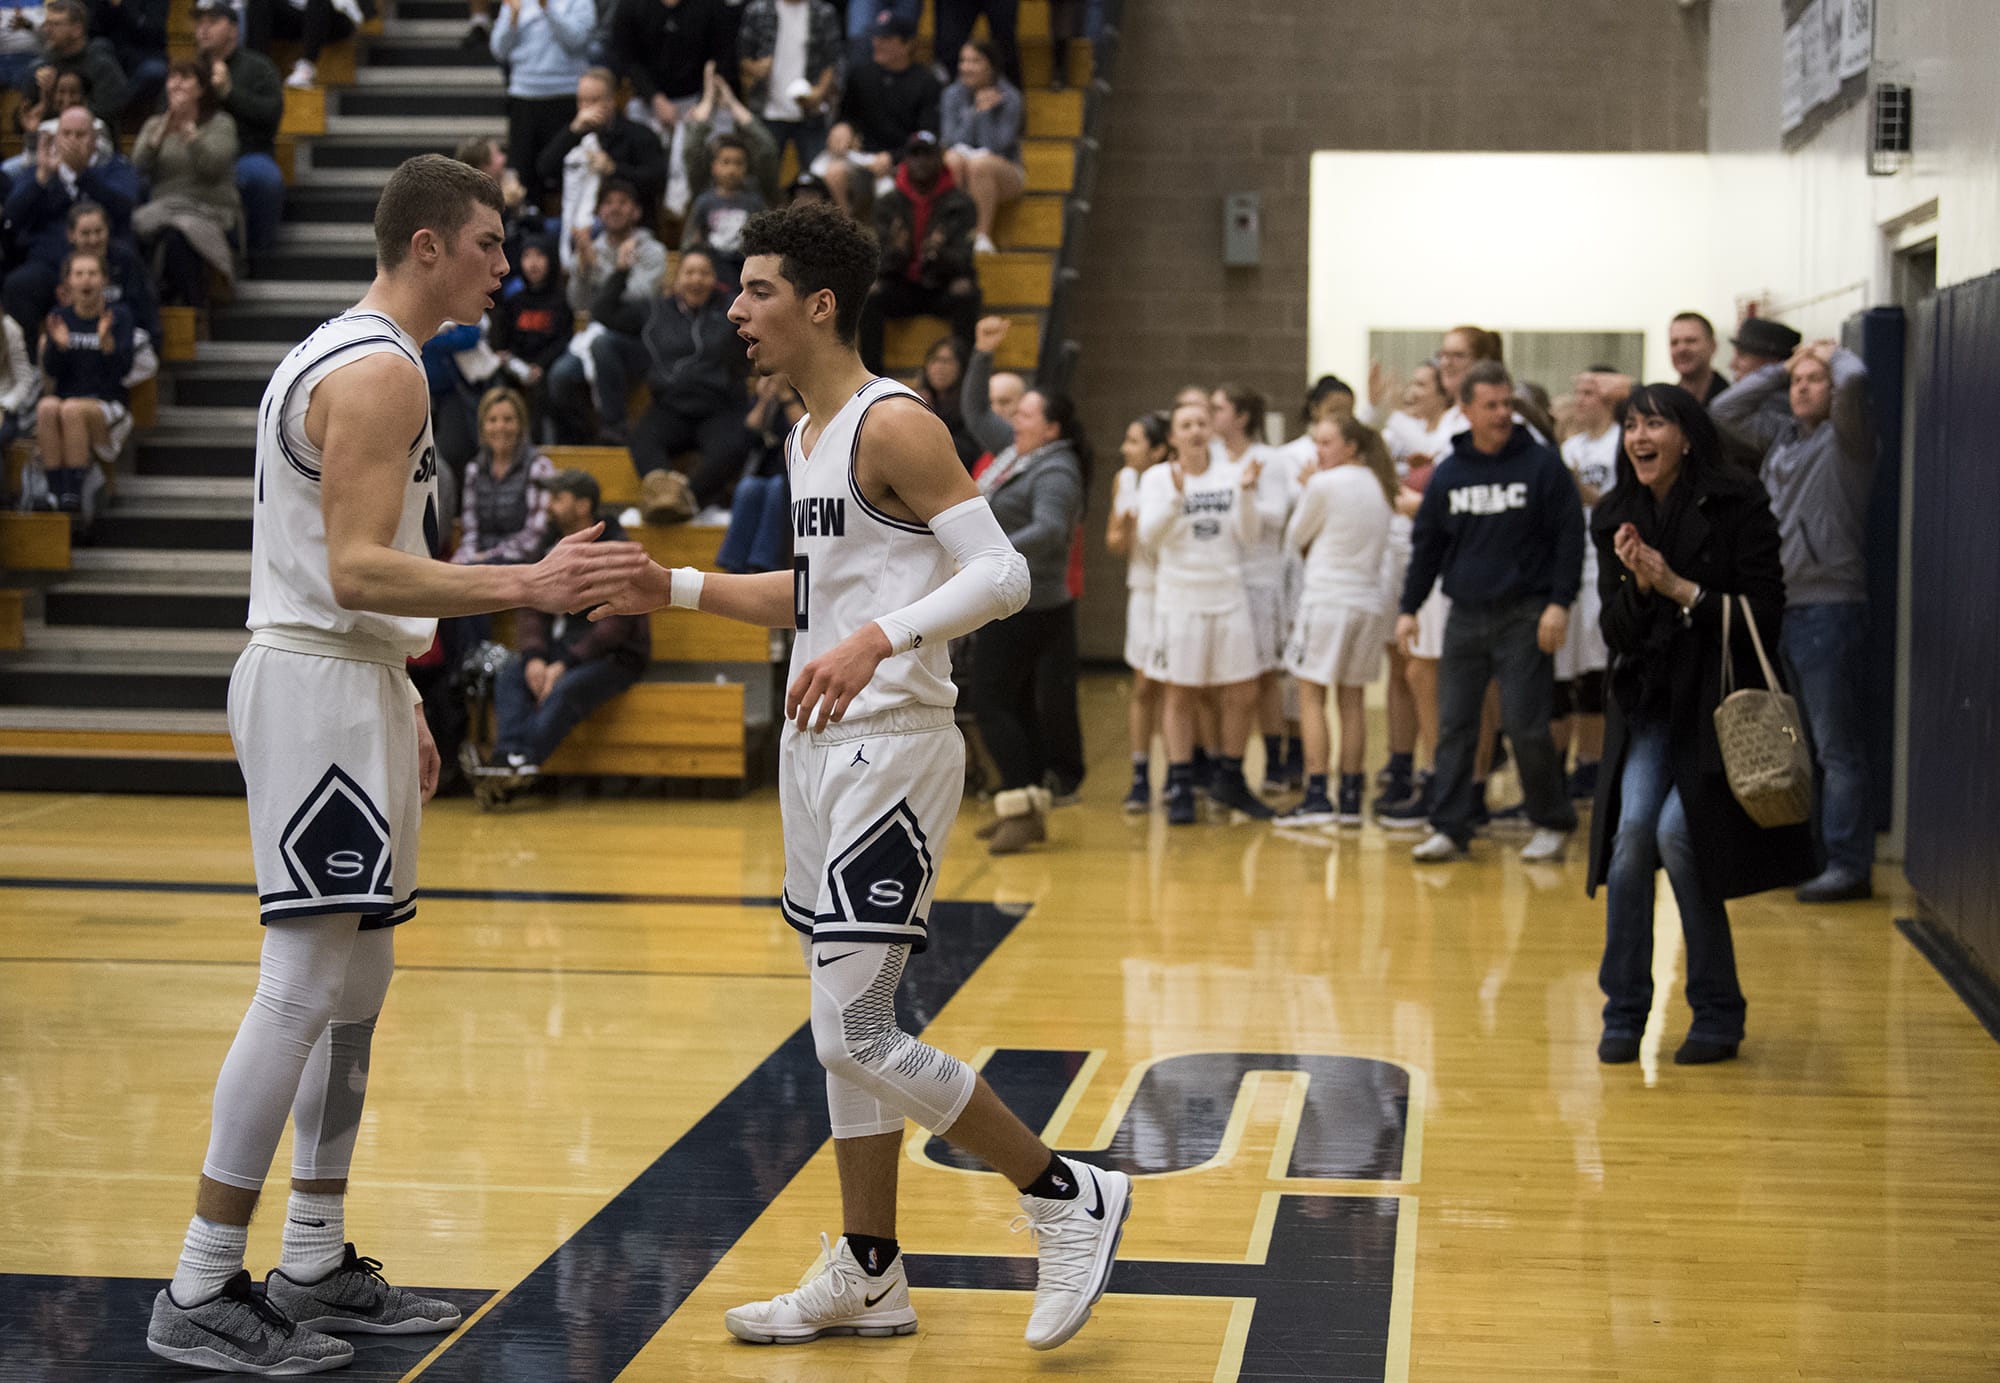 Skyview's Cole Grossman (1) congratulates Alex Schumacher (0) after a basket in the final moments of Friday night's game against Union at Skyview High School in Vancouver on Jan. 5, 2018. Skyview defeated Union 59-55.